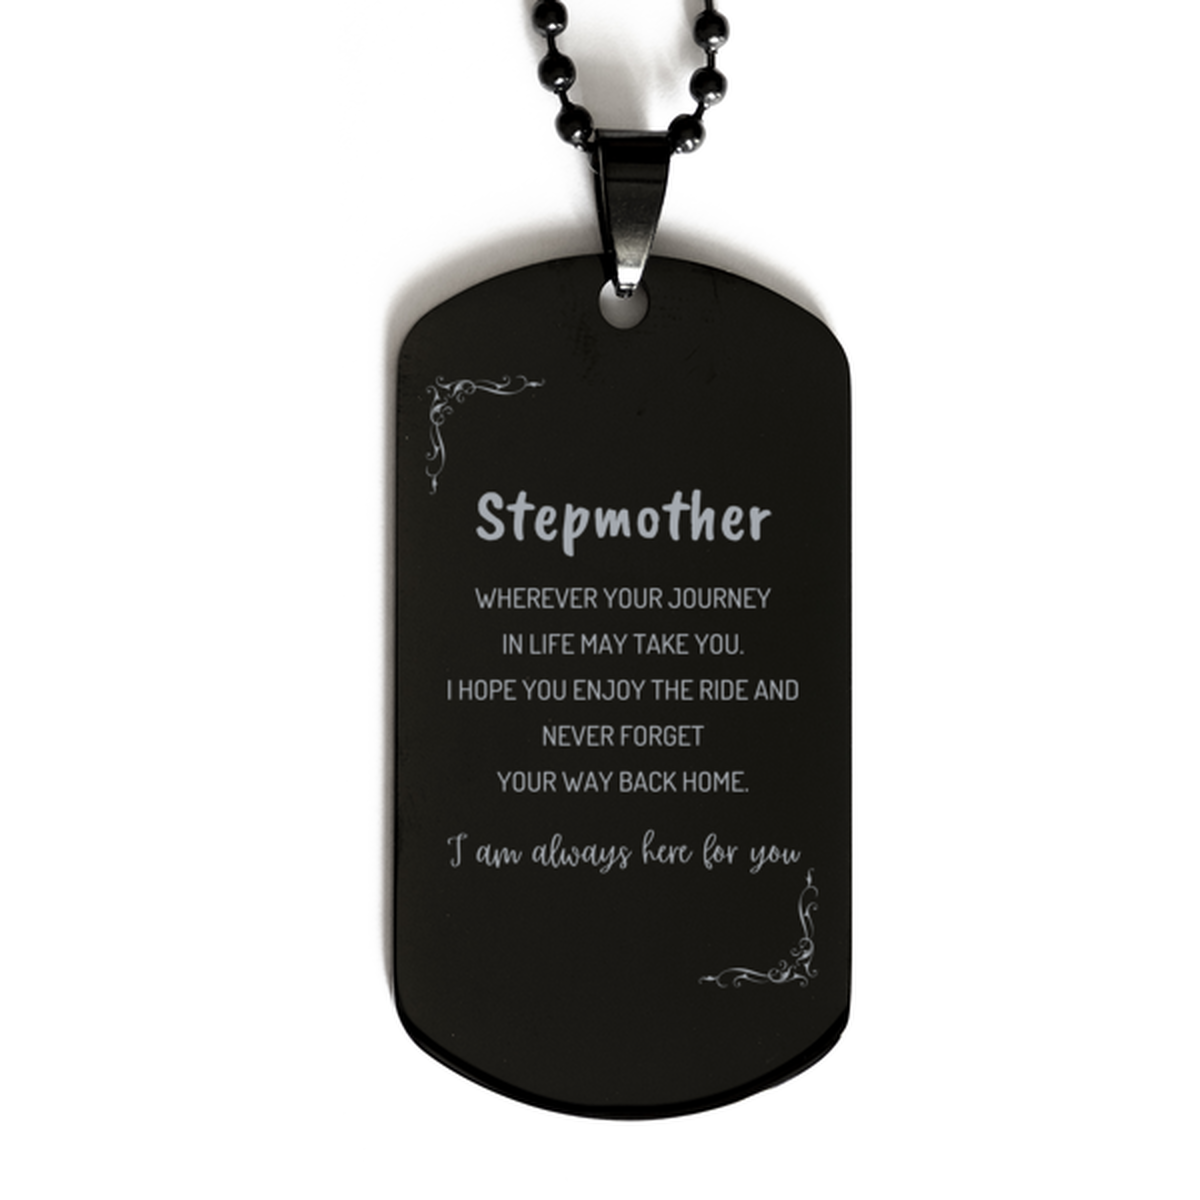 Stepmother wherever your journey in life may take you, I am always here for you Stepmother Black Dog Tag, Awesome Christmas Gifts For Stepmother, Stepmother Birthday Gifts for Men Women Family Loved One